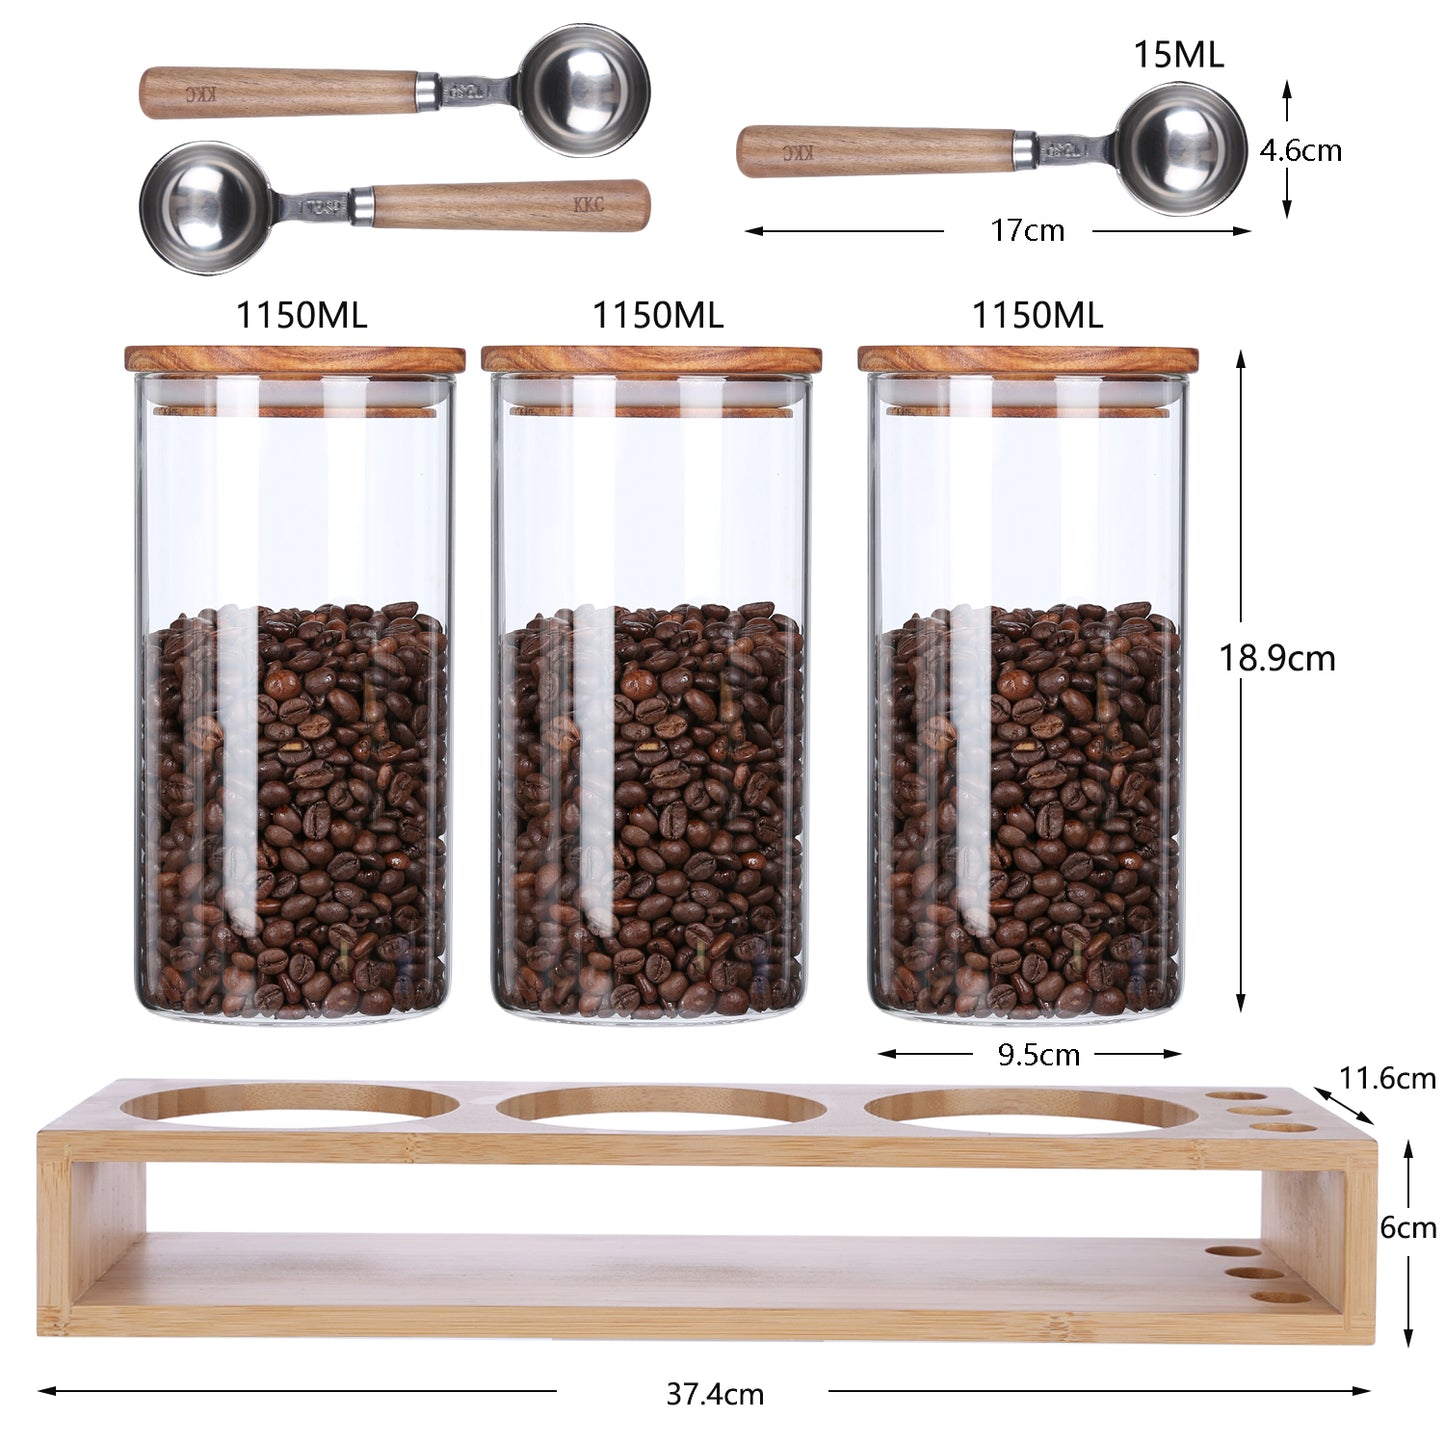 KKC HOME ACCENTS Sealed Glass Containers with Airtight Wood Lids and Scoops for Kitchen Counter,Sealed Jars for Flour,Brown Sugar,Loose Leaf Tea,Coffee Bean or Ground Coffee,39 Fluid-oz